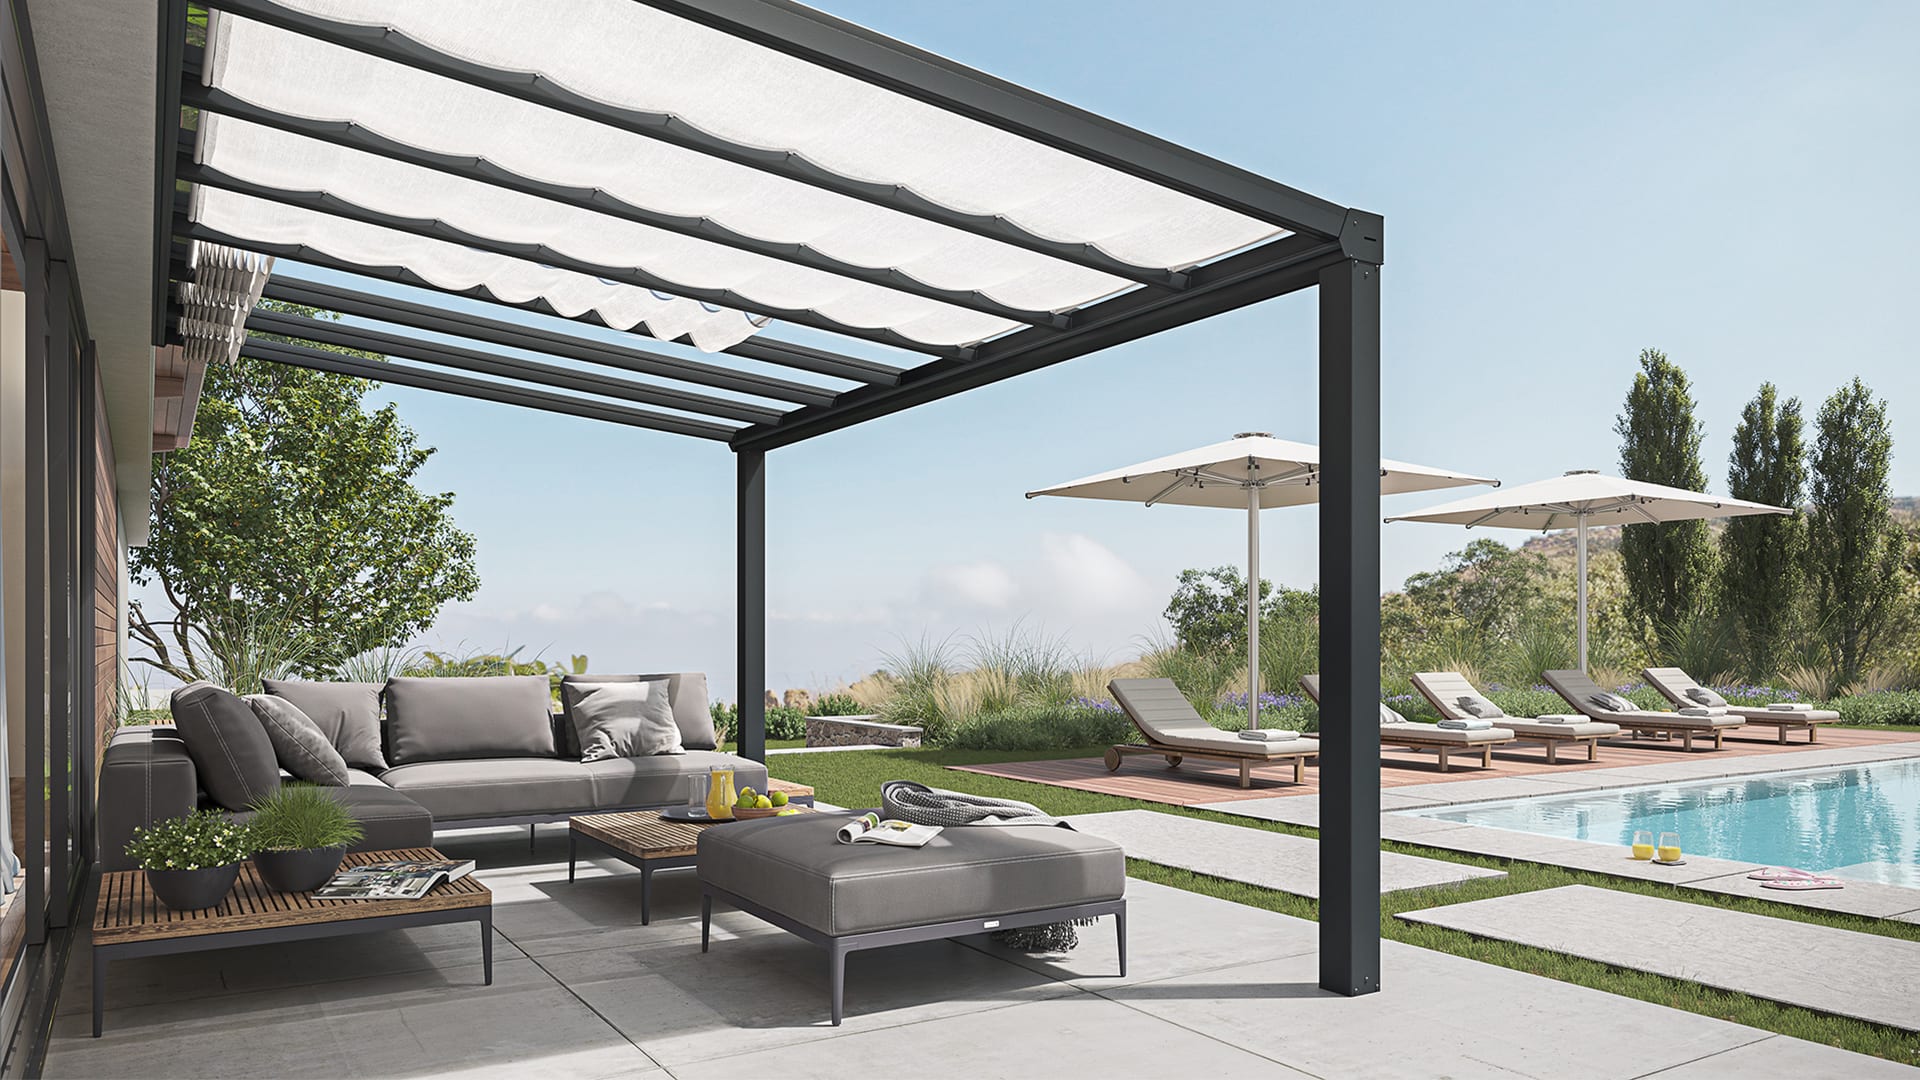 Maayan-Golan_Architectural-Visualization_product-visualization_outdoor-pation-cover_palram-applications_06